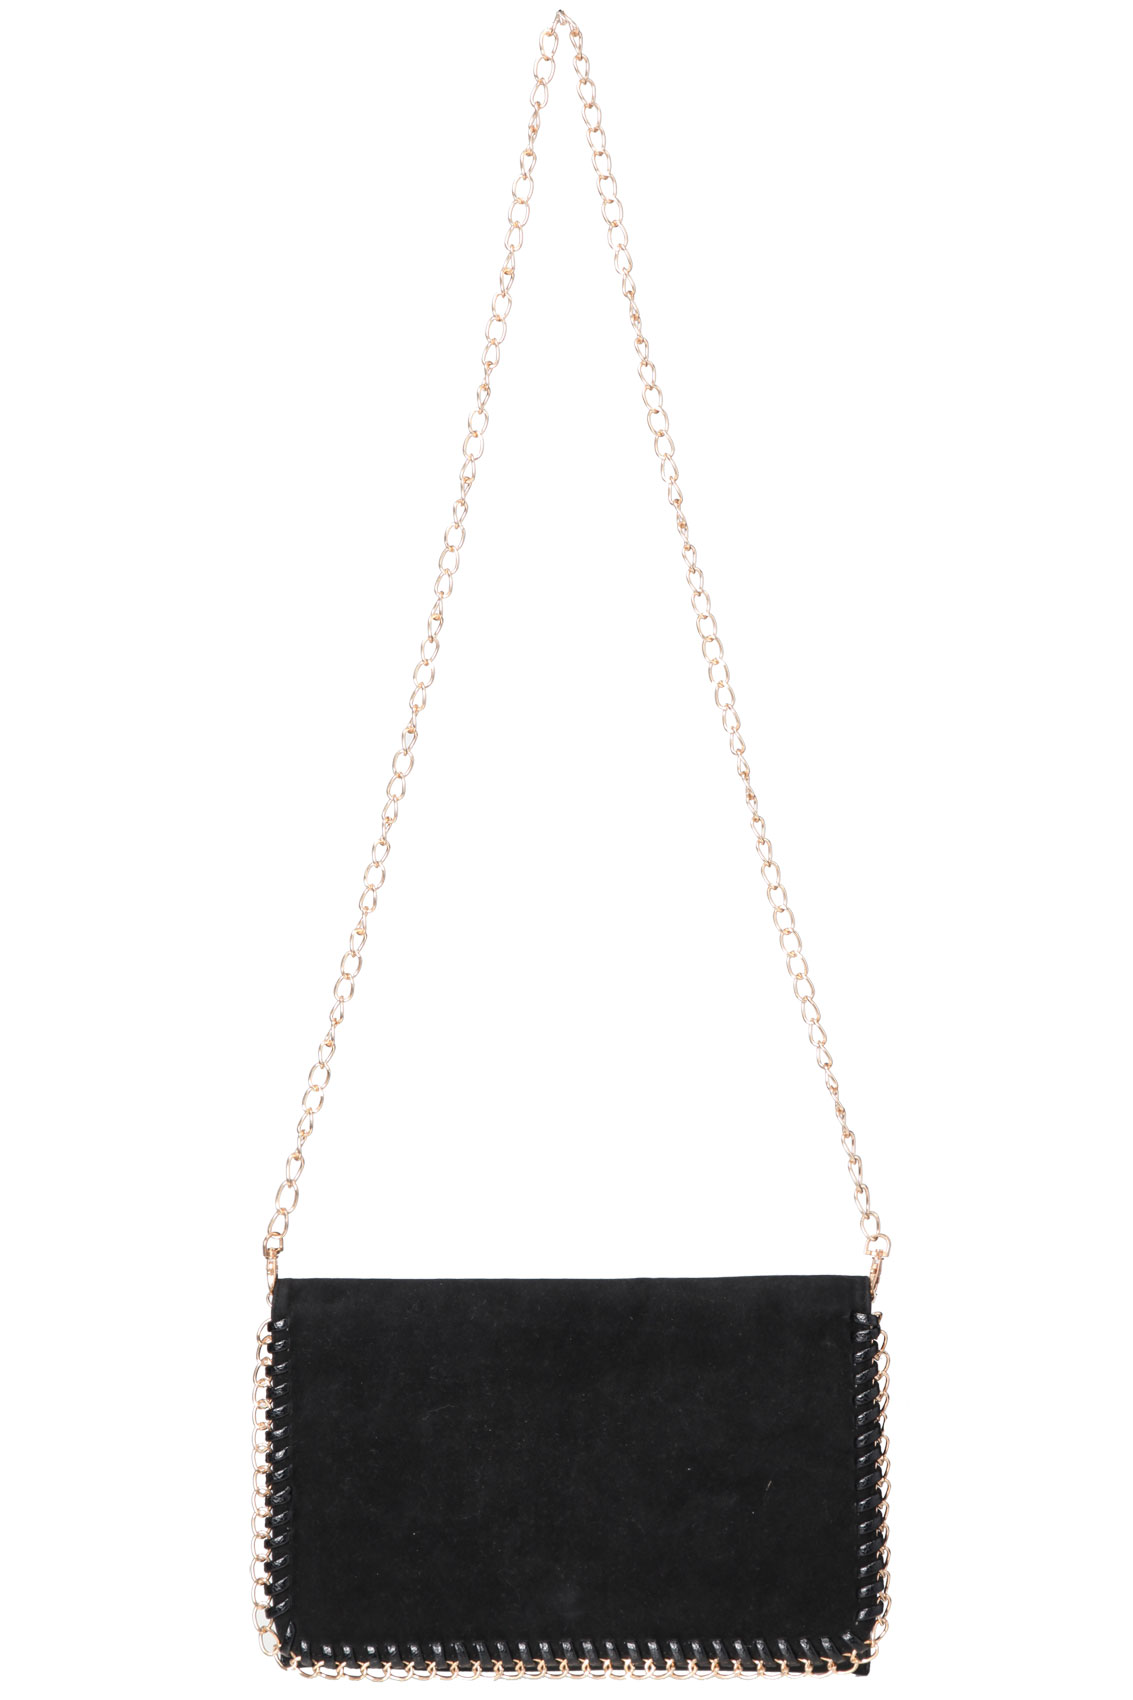 Black PU Clutch Bag With Suede Front And Gold Chain